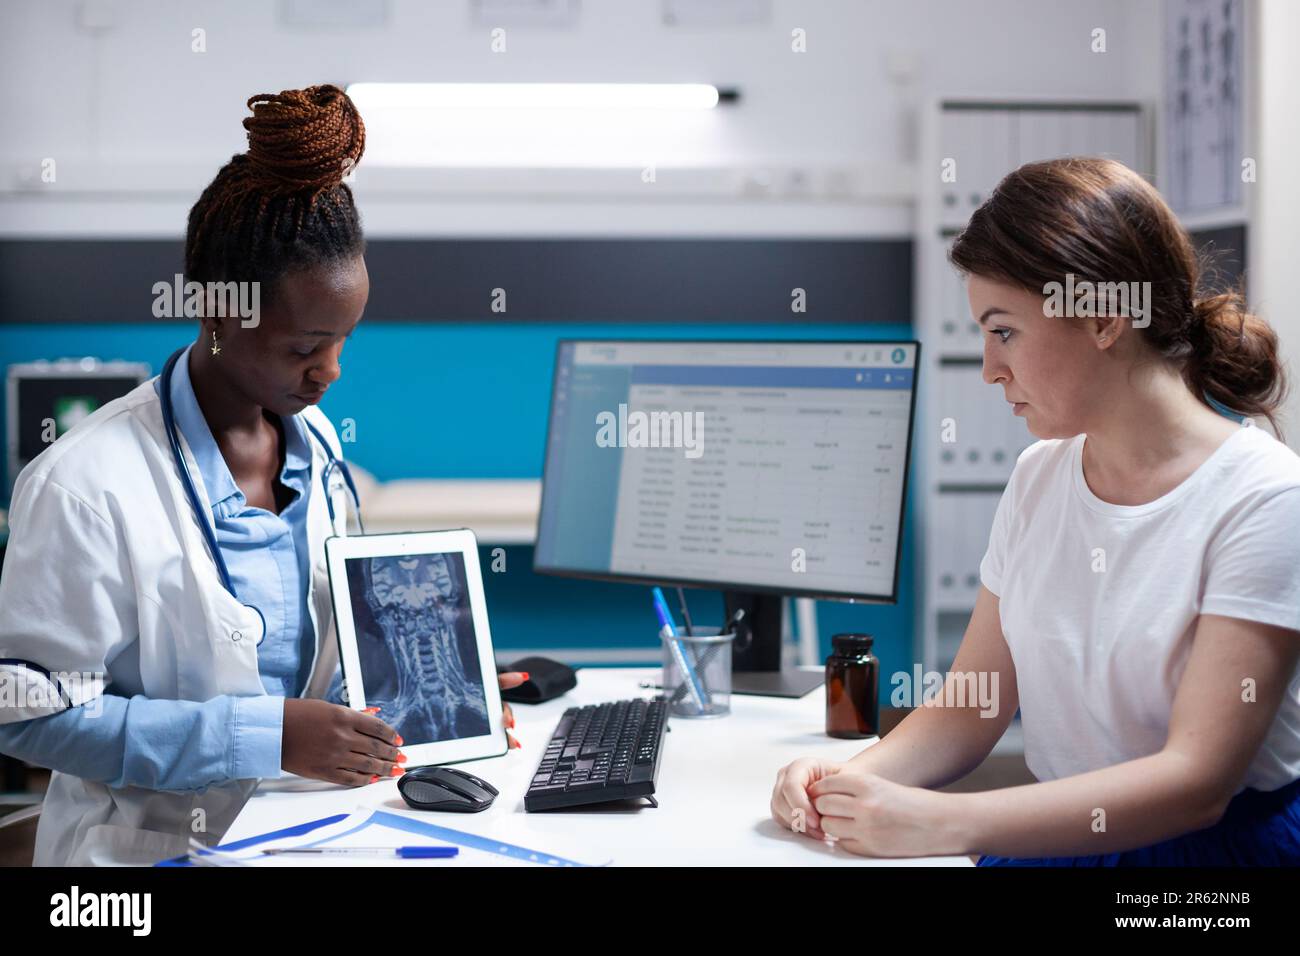 Doctor showing cervical vertebrae injury neck pain x-ray ct scan results on tablet to patient during medical appointment. Healthcare specialist diagnosing woman after symptoms checkup Stock Photo